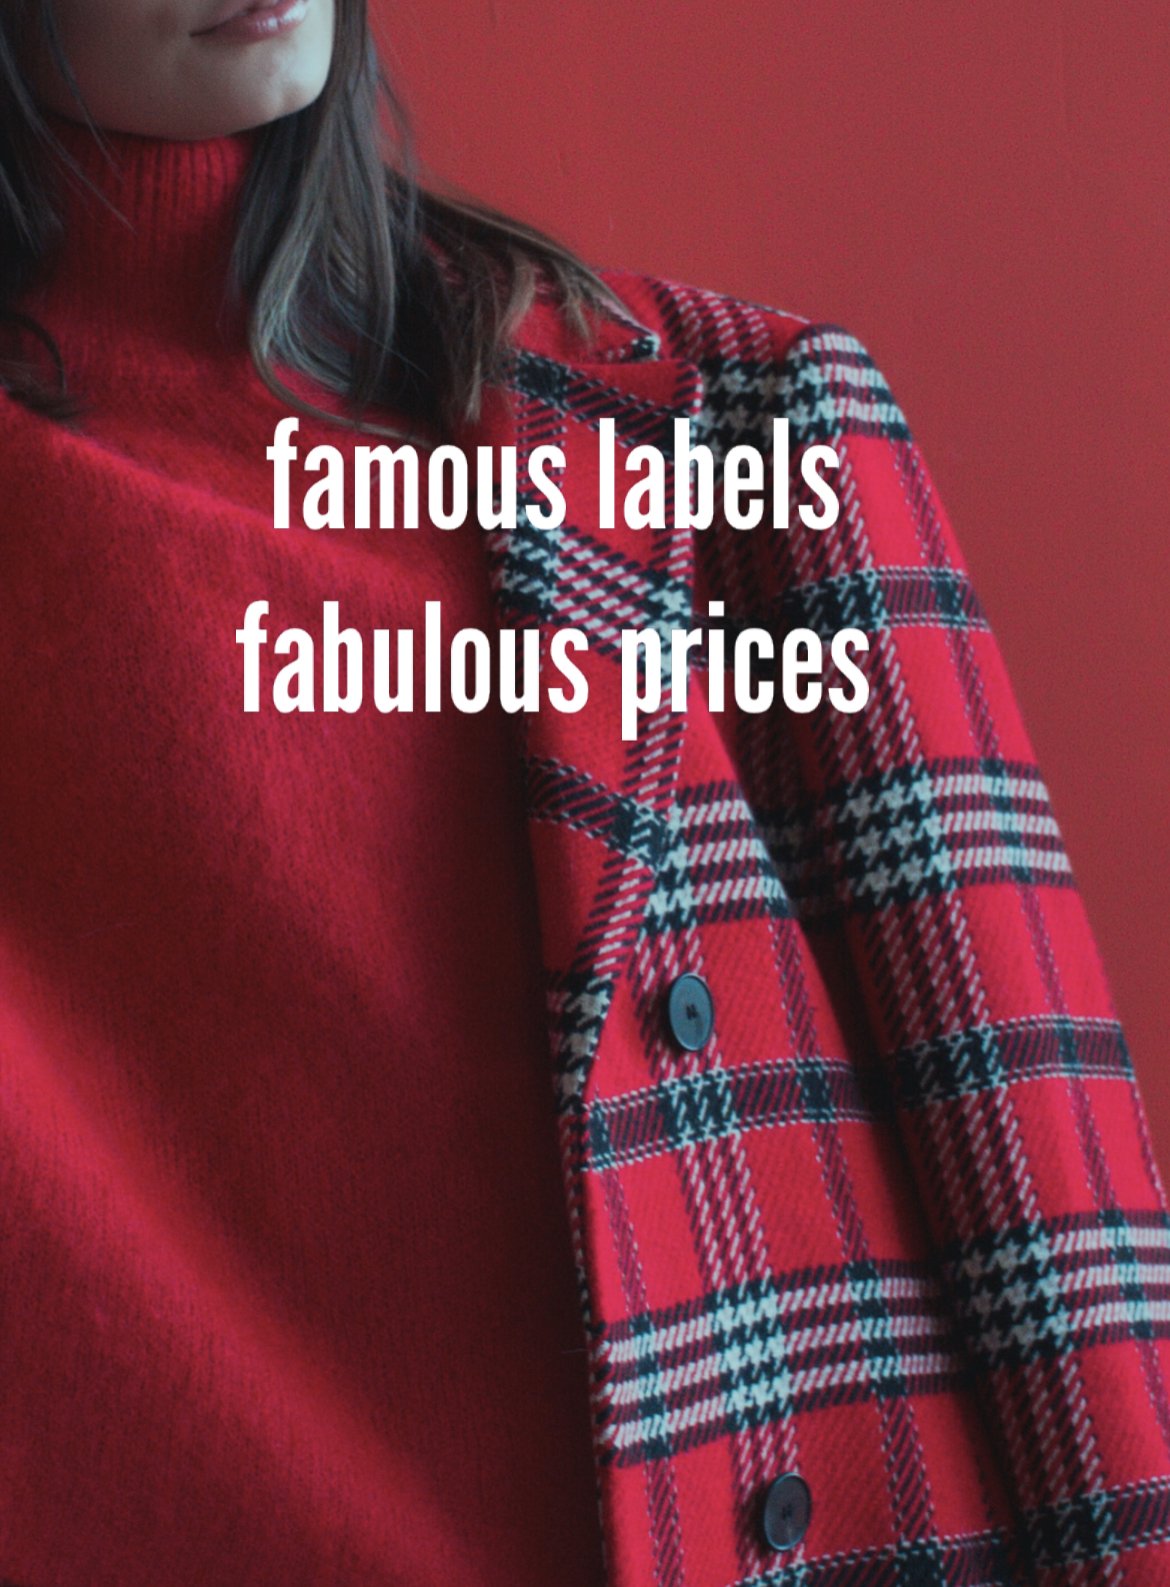 red.plaid.jacket.famous.labels.graphic.jpg